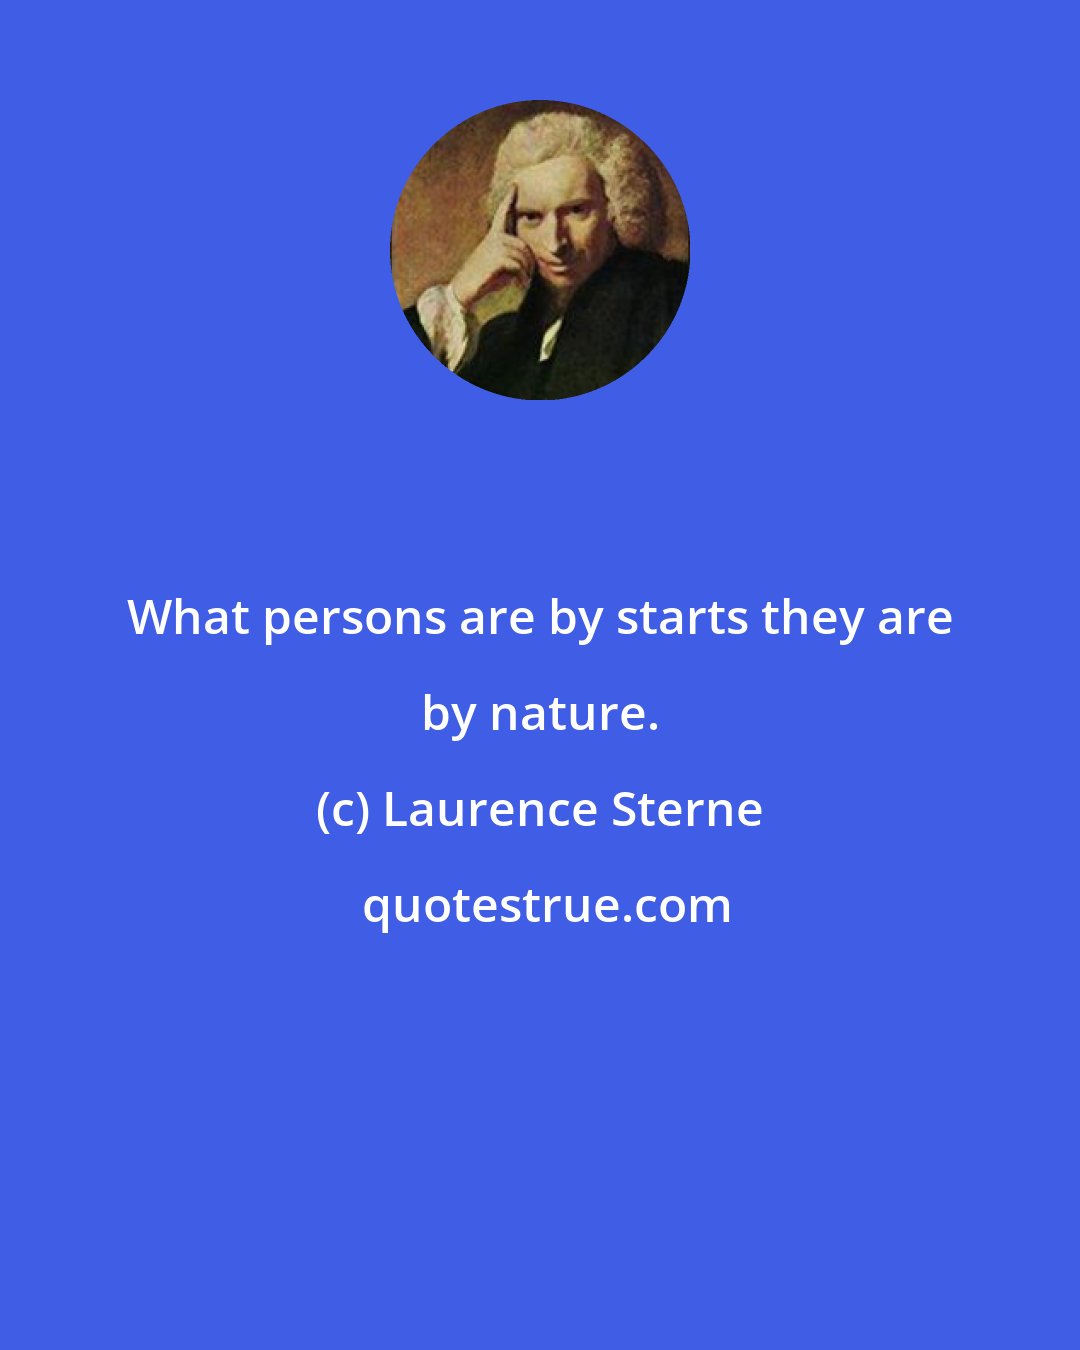 Laurence Sterne: What persons are by starts they are by nature.